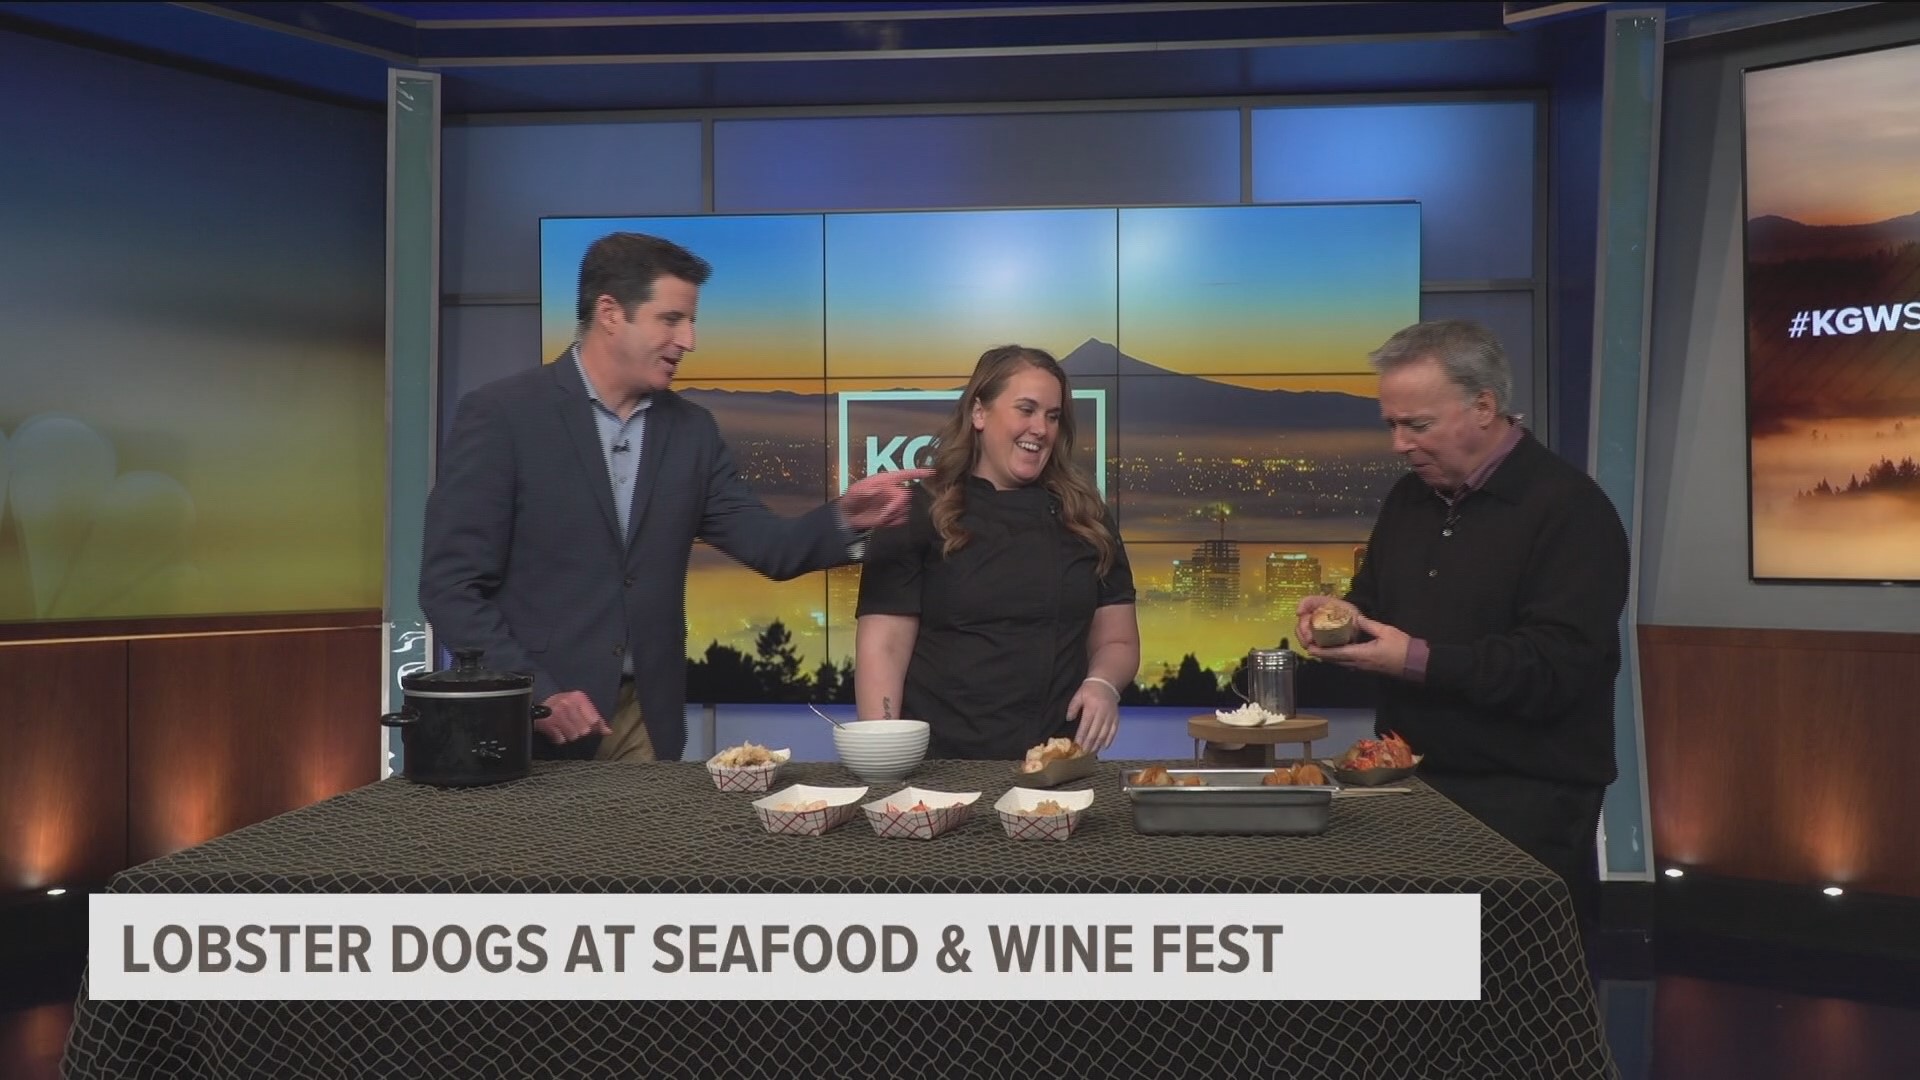 The Portland Seafood and Wine Festival is happening at the Portland Expo Center March 1 - 3. For more information visit PDXSeafoodAndWineFestival.com